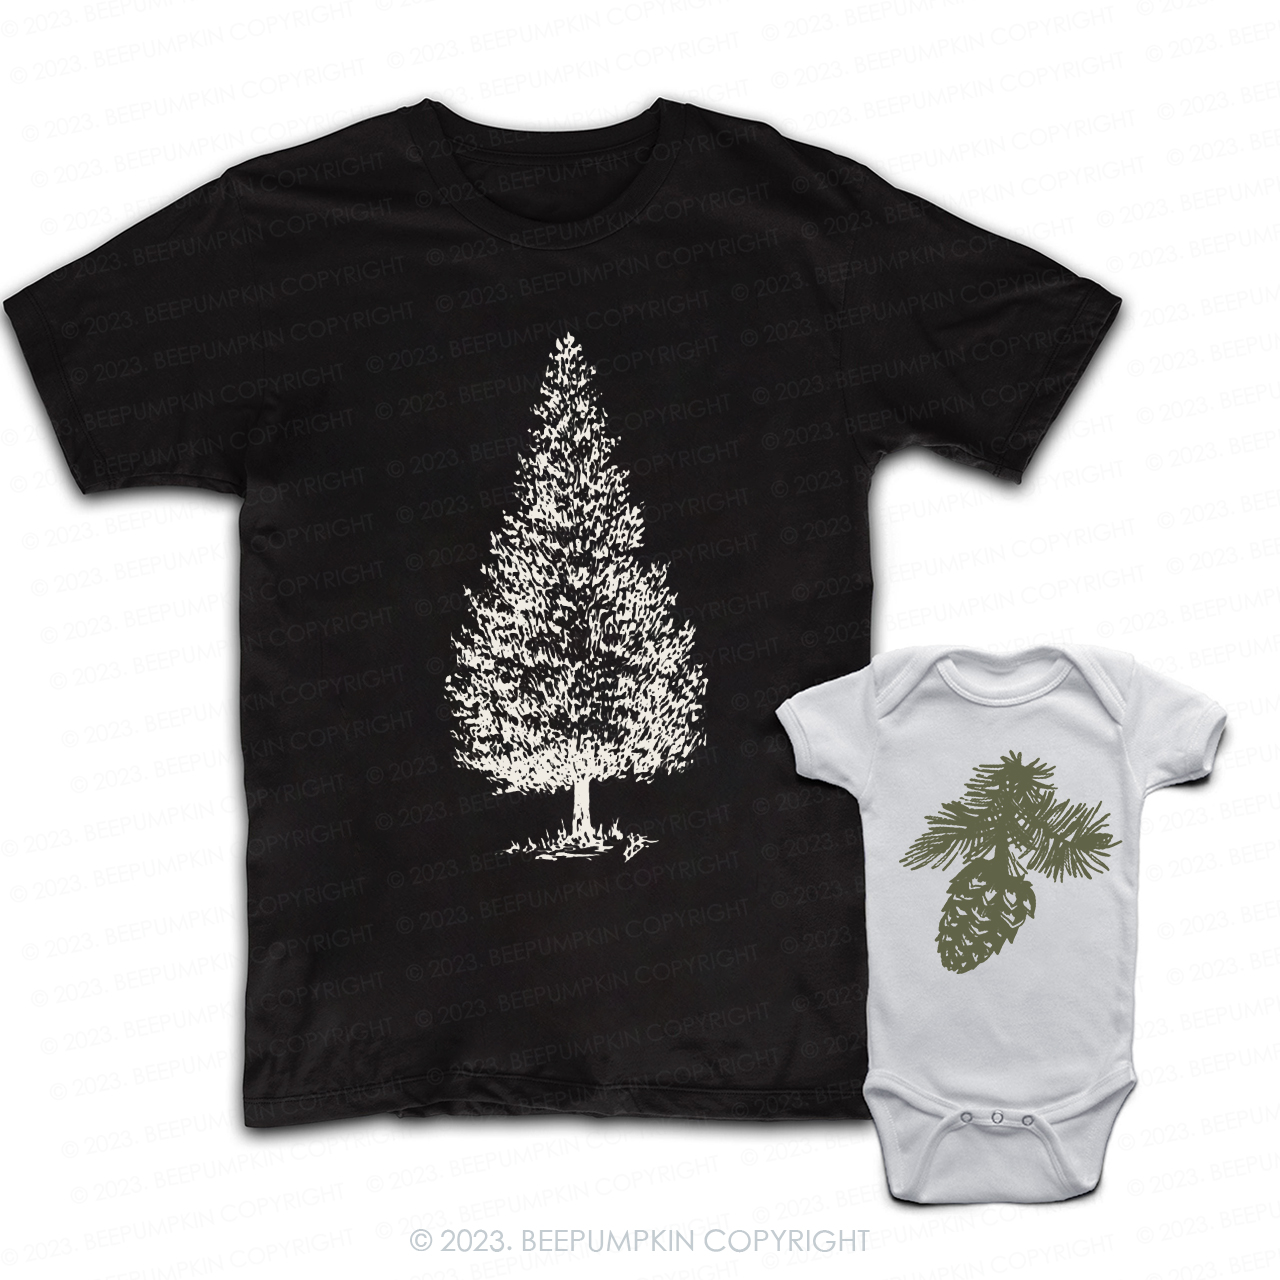 Pine Tree And Pinecone Matching T-Shirts For Dad&Me